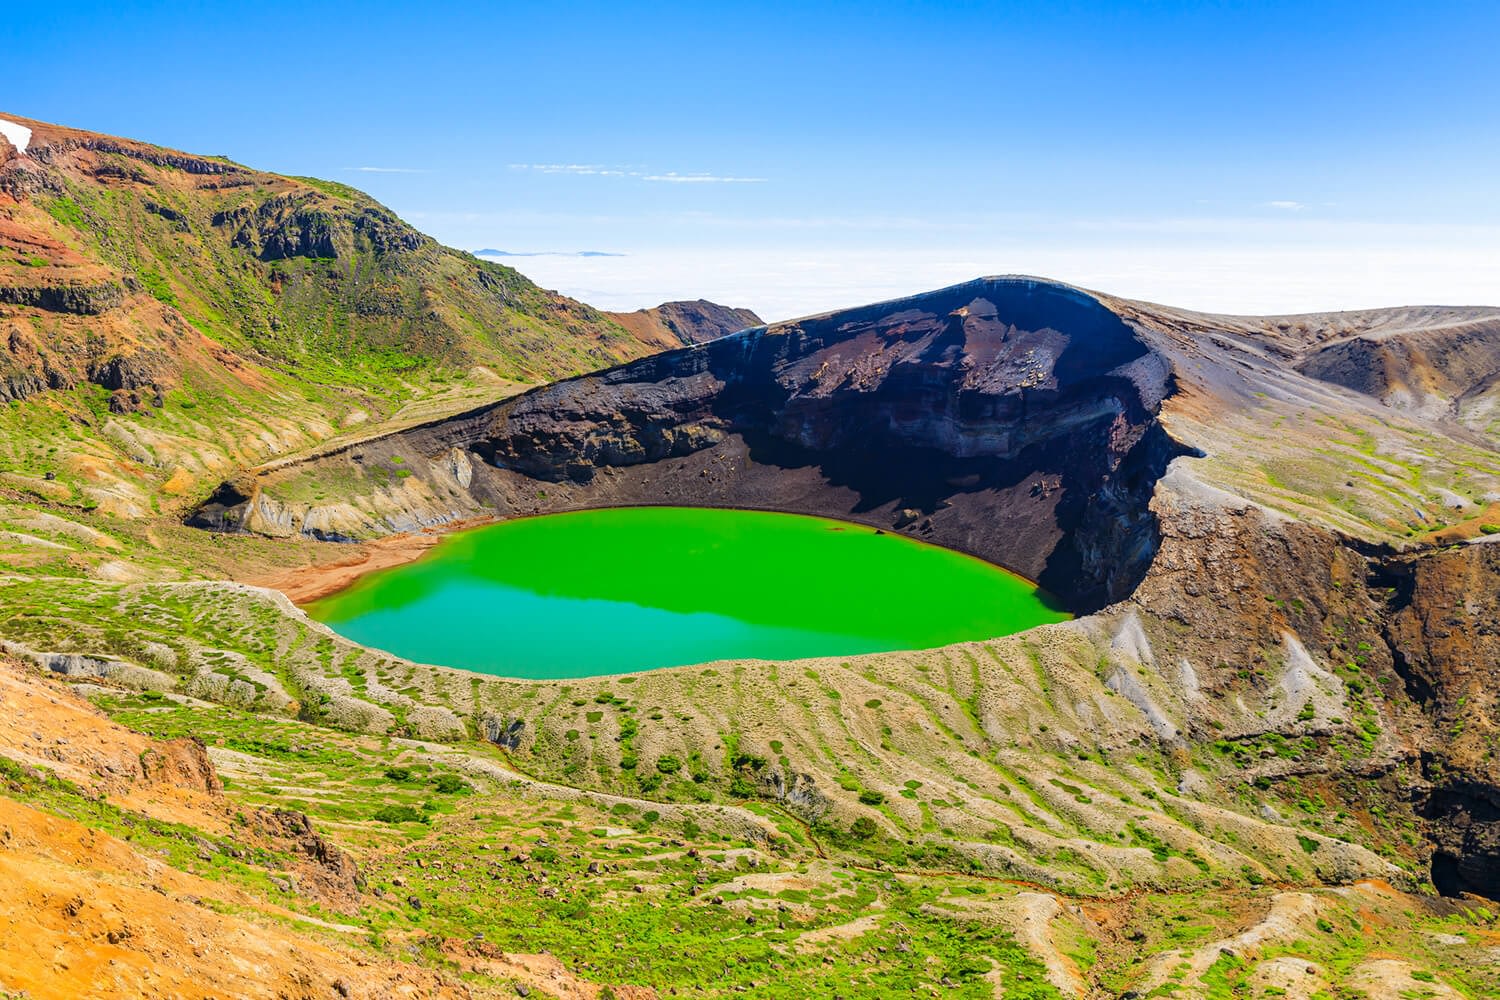 Big crater on a mountainside filled with bright green water